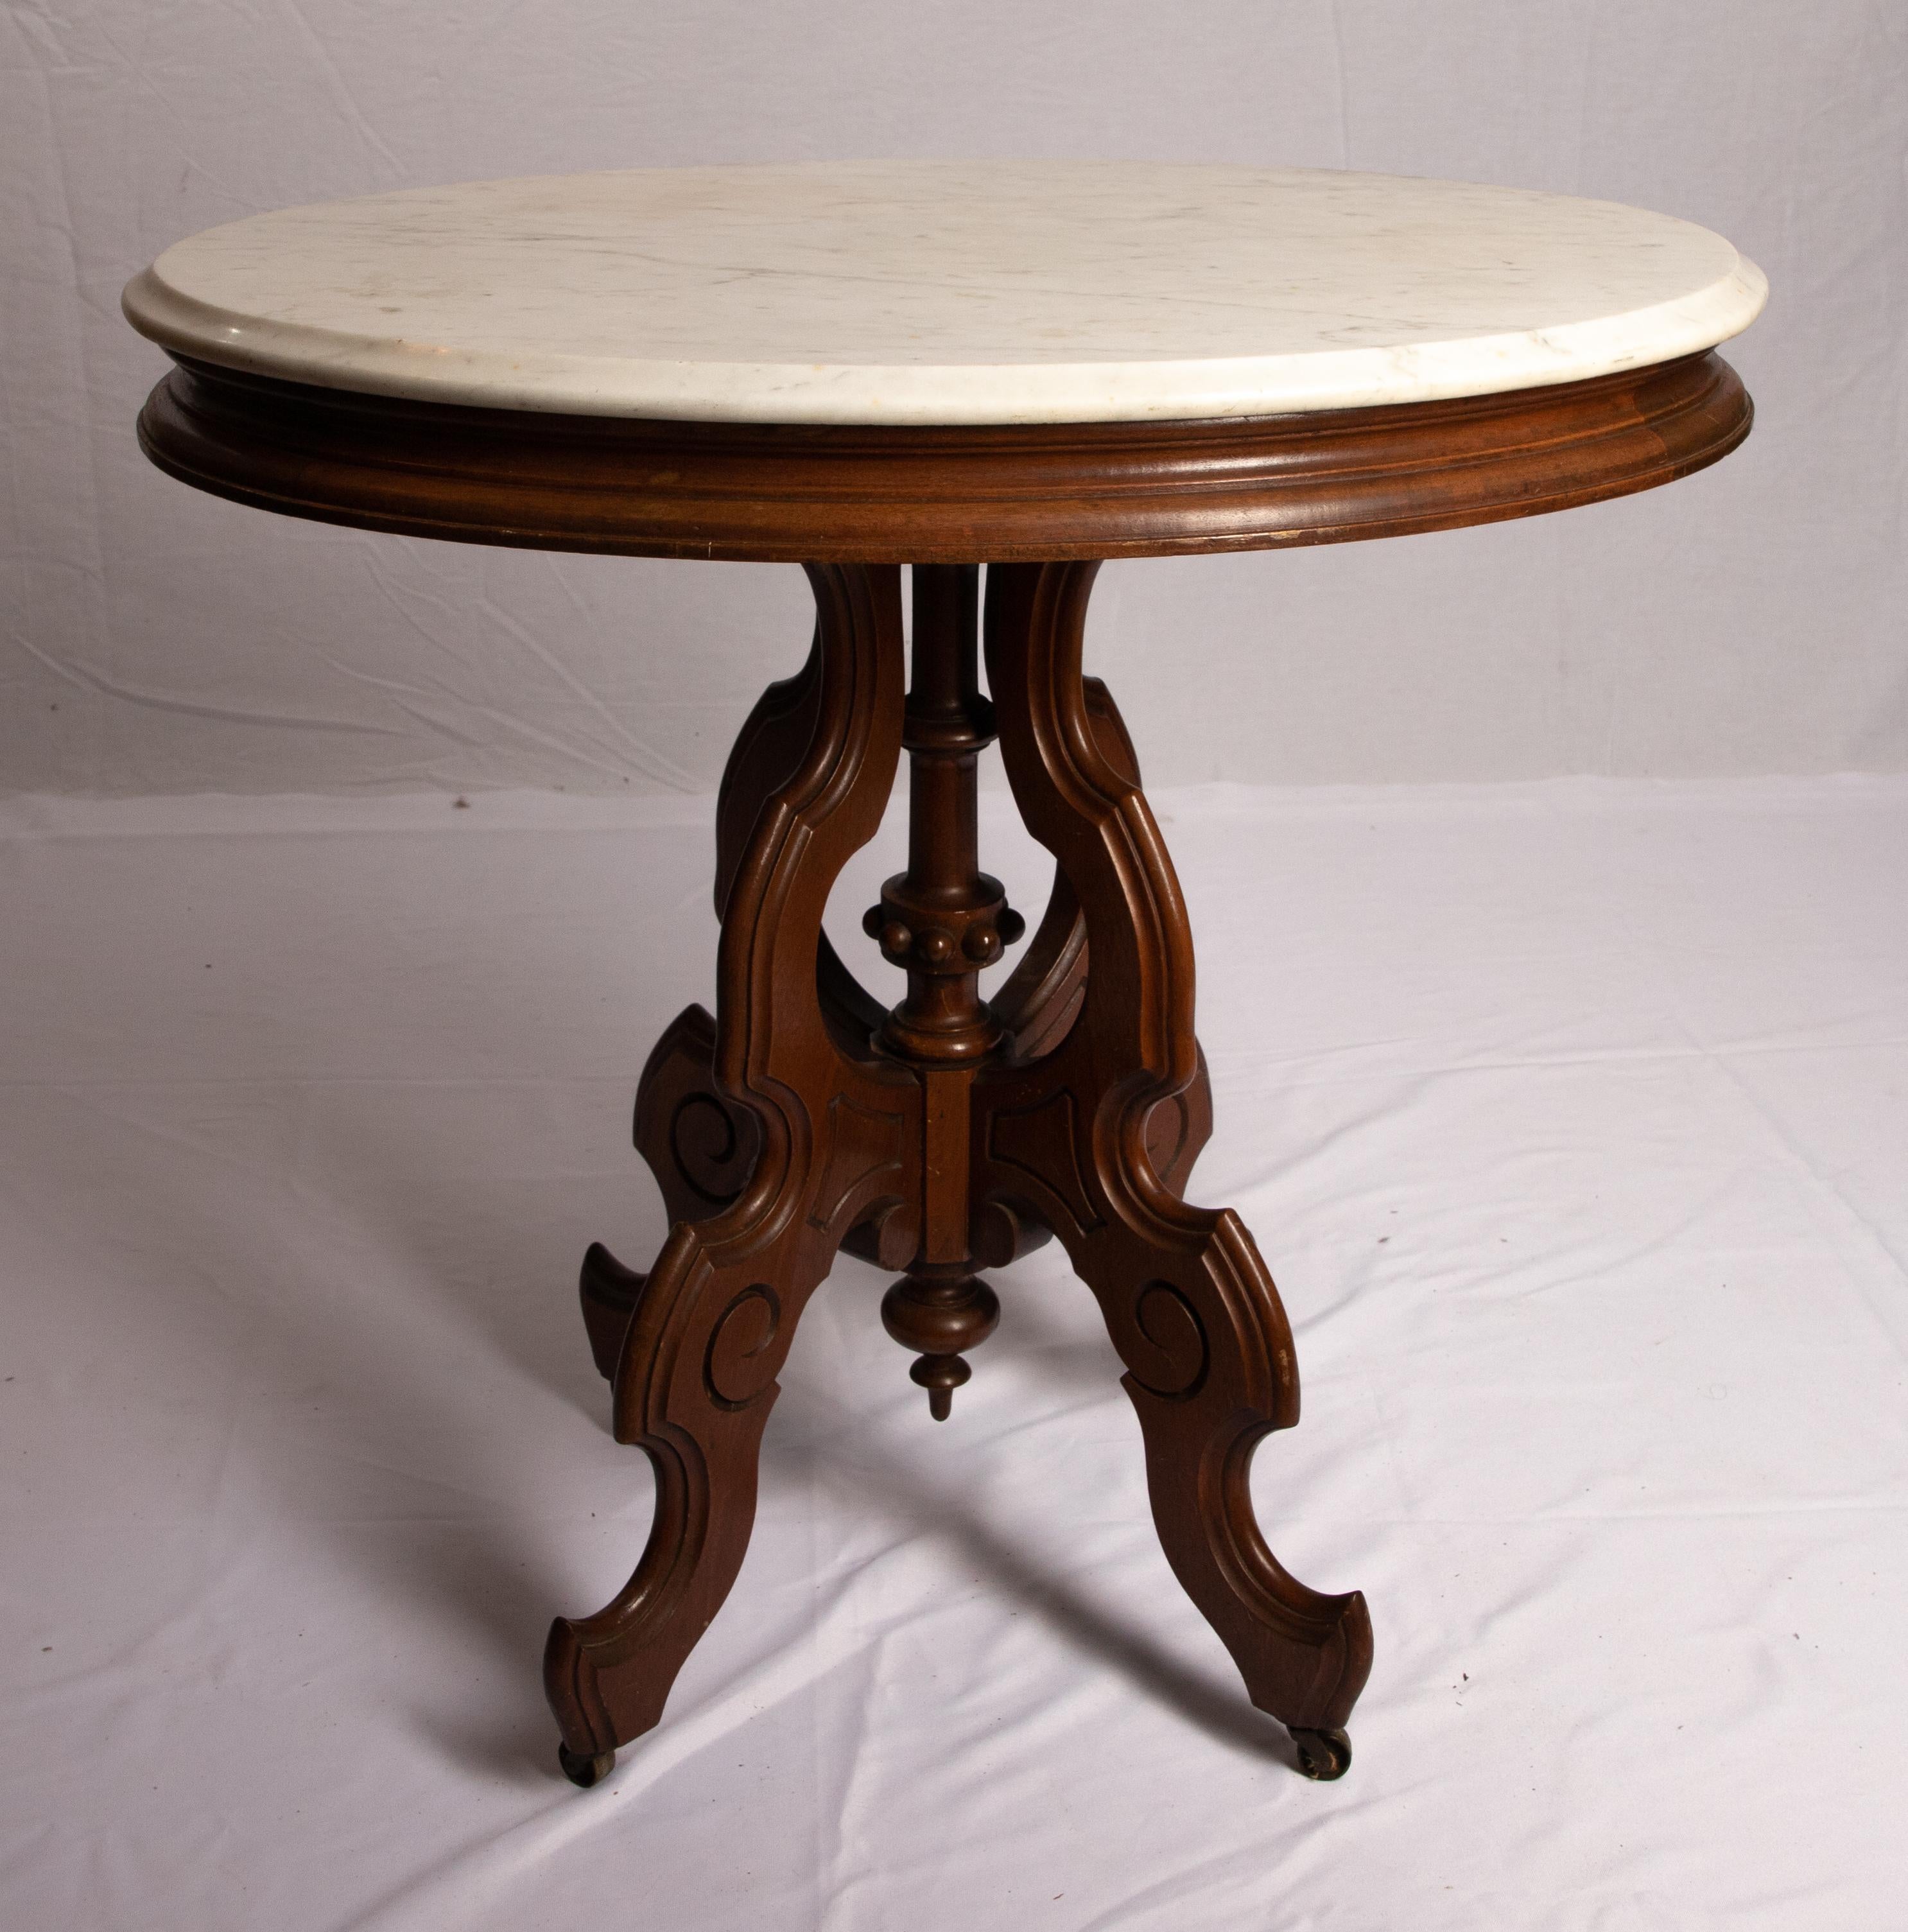 Victorian Carrera Marble-Top Parlor Table 1